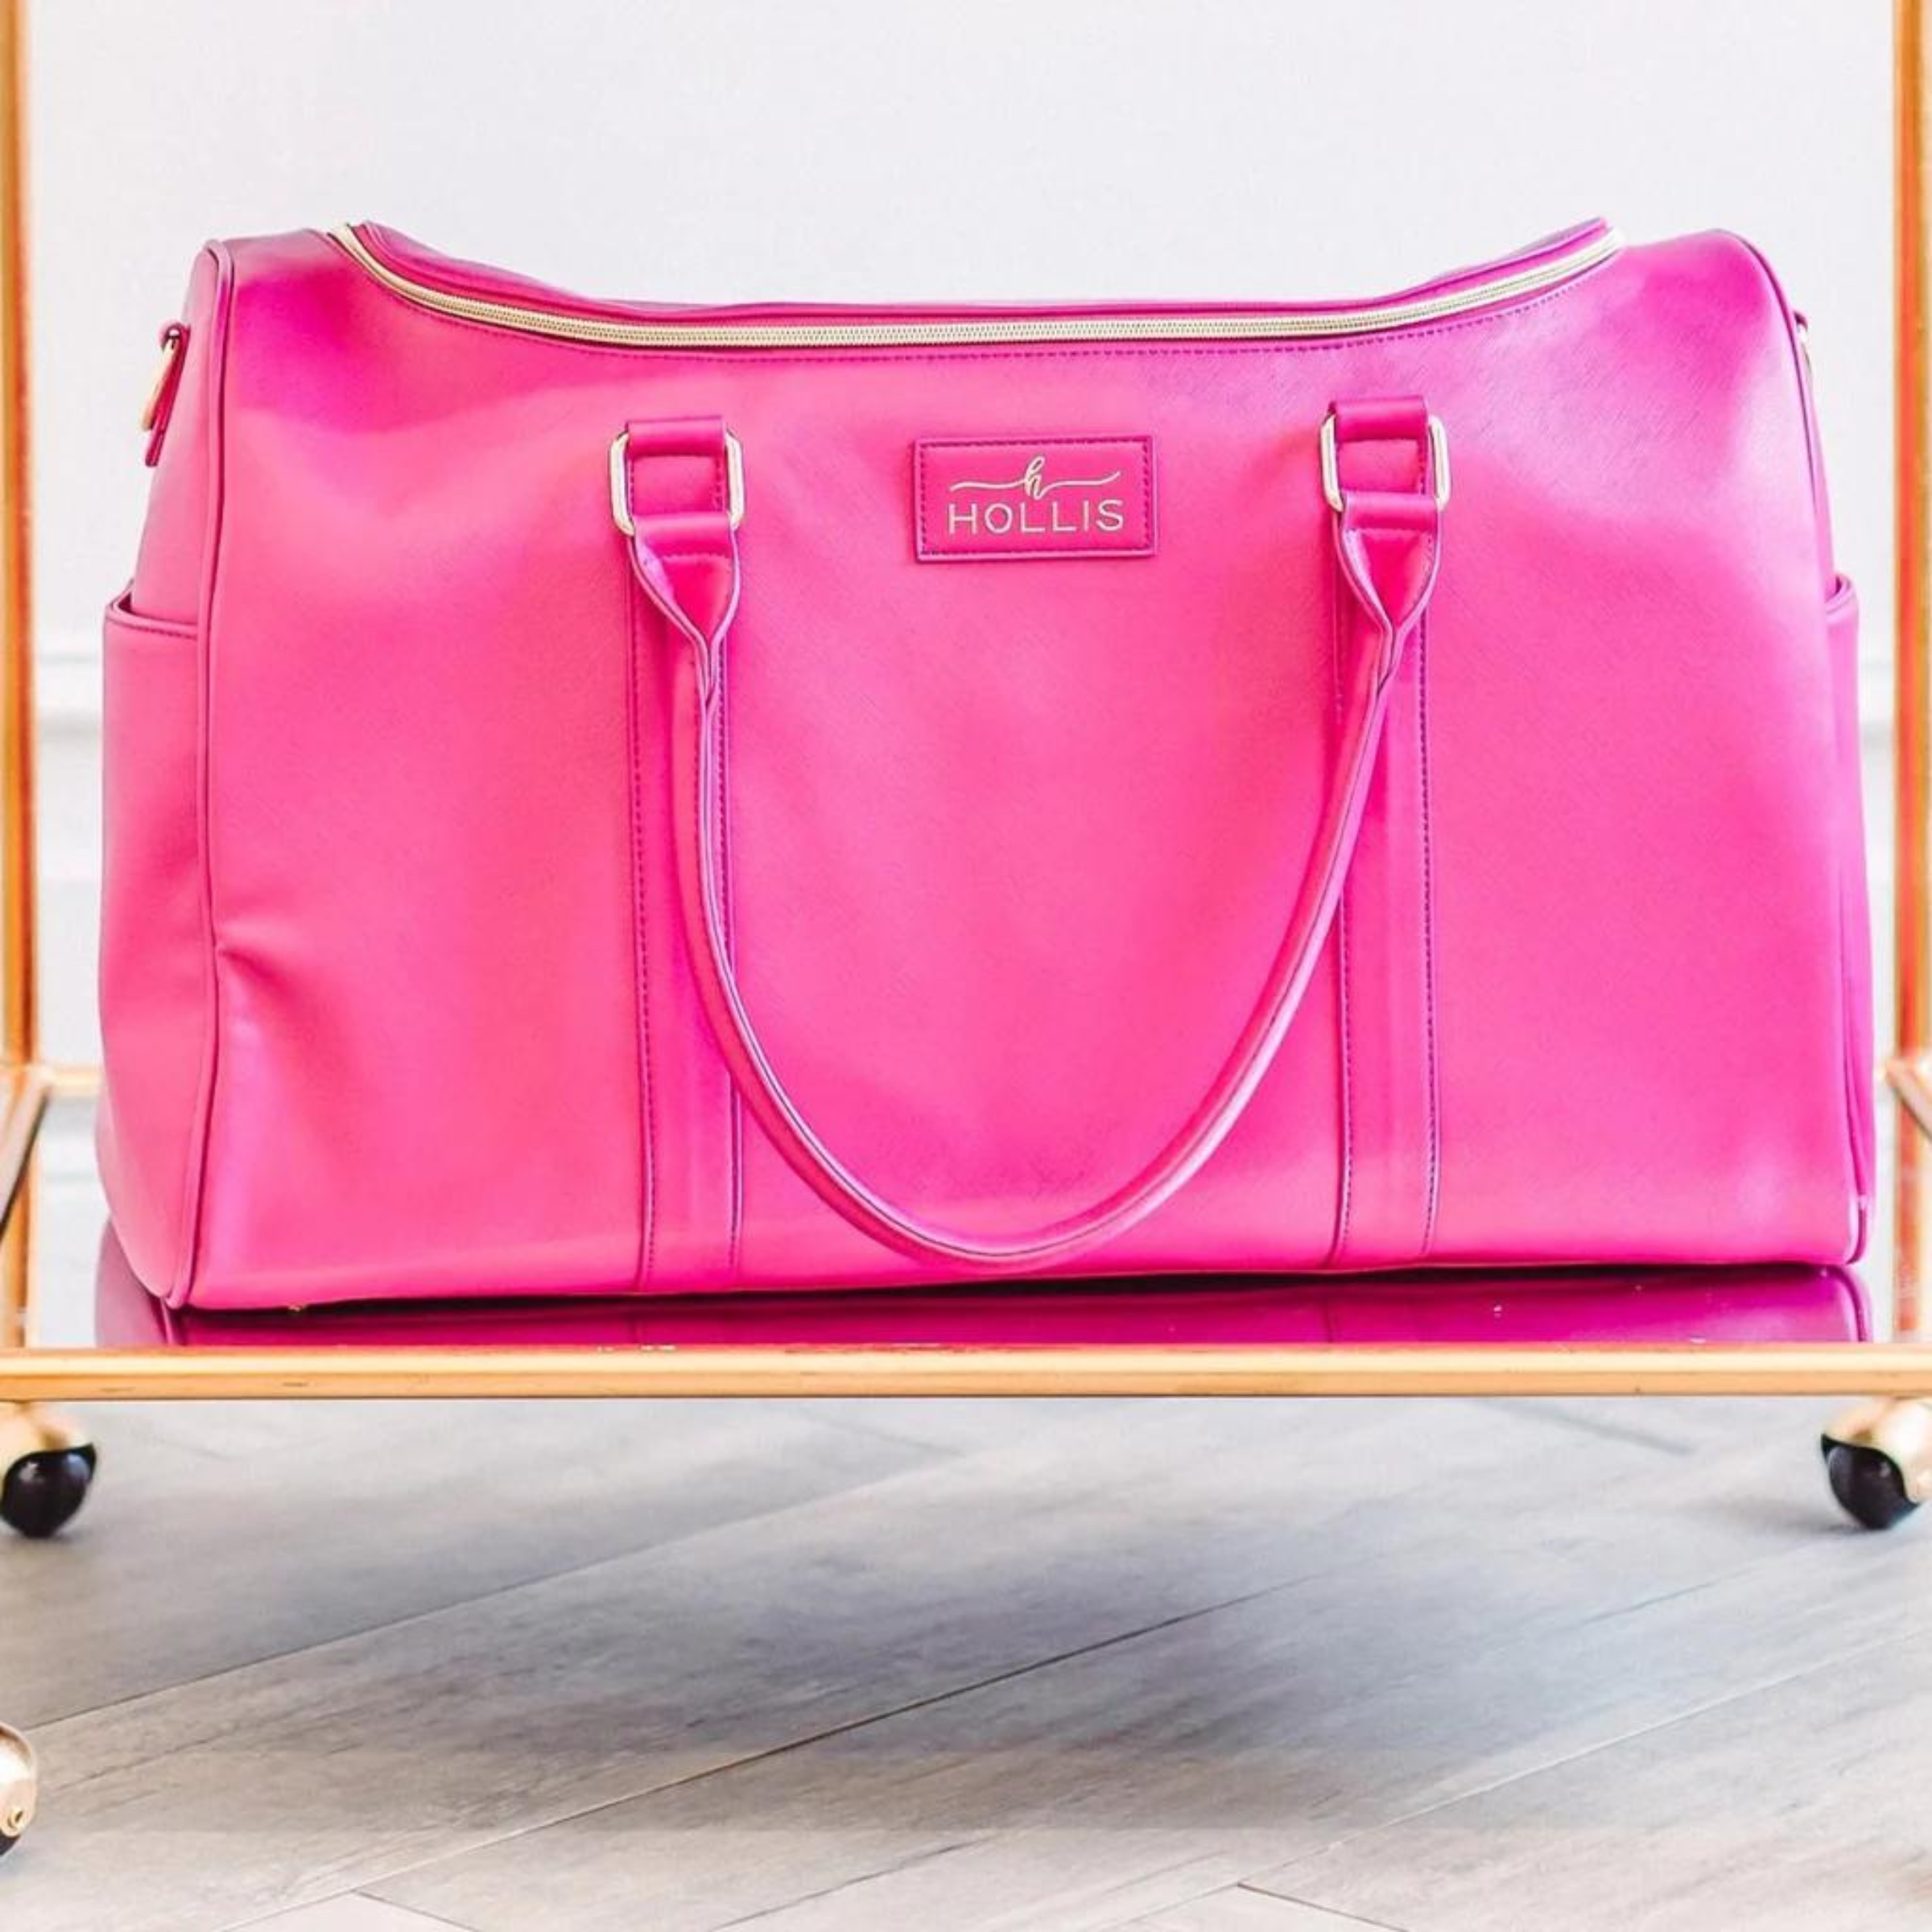 Hot pink duffel bag with hot pink handles. This bag has a gold top zipper and pocket on each side. This bag is pictured on a gold cart in front of a light grey wall. 